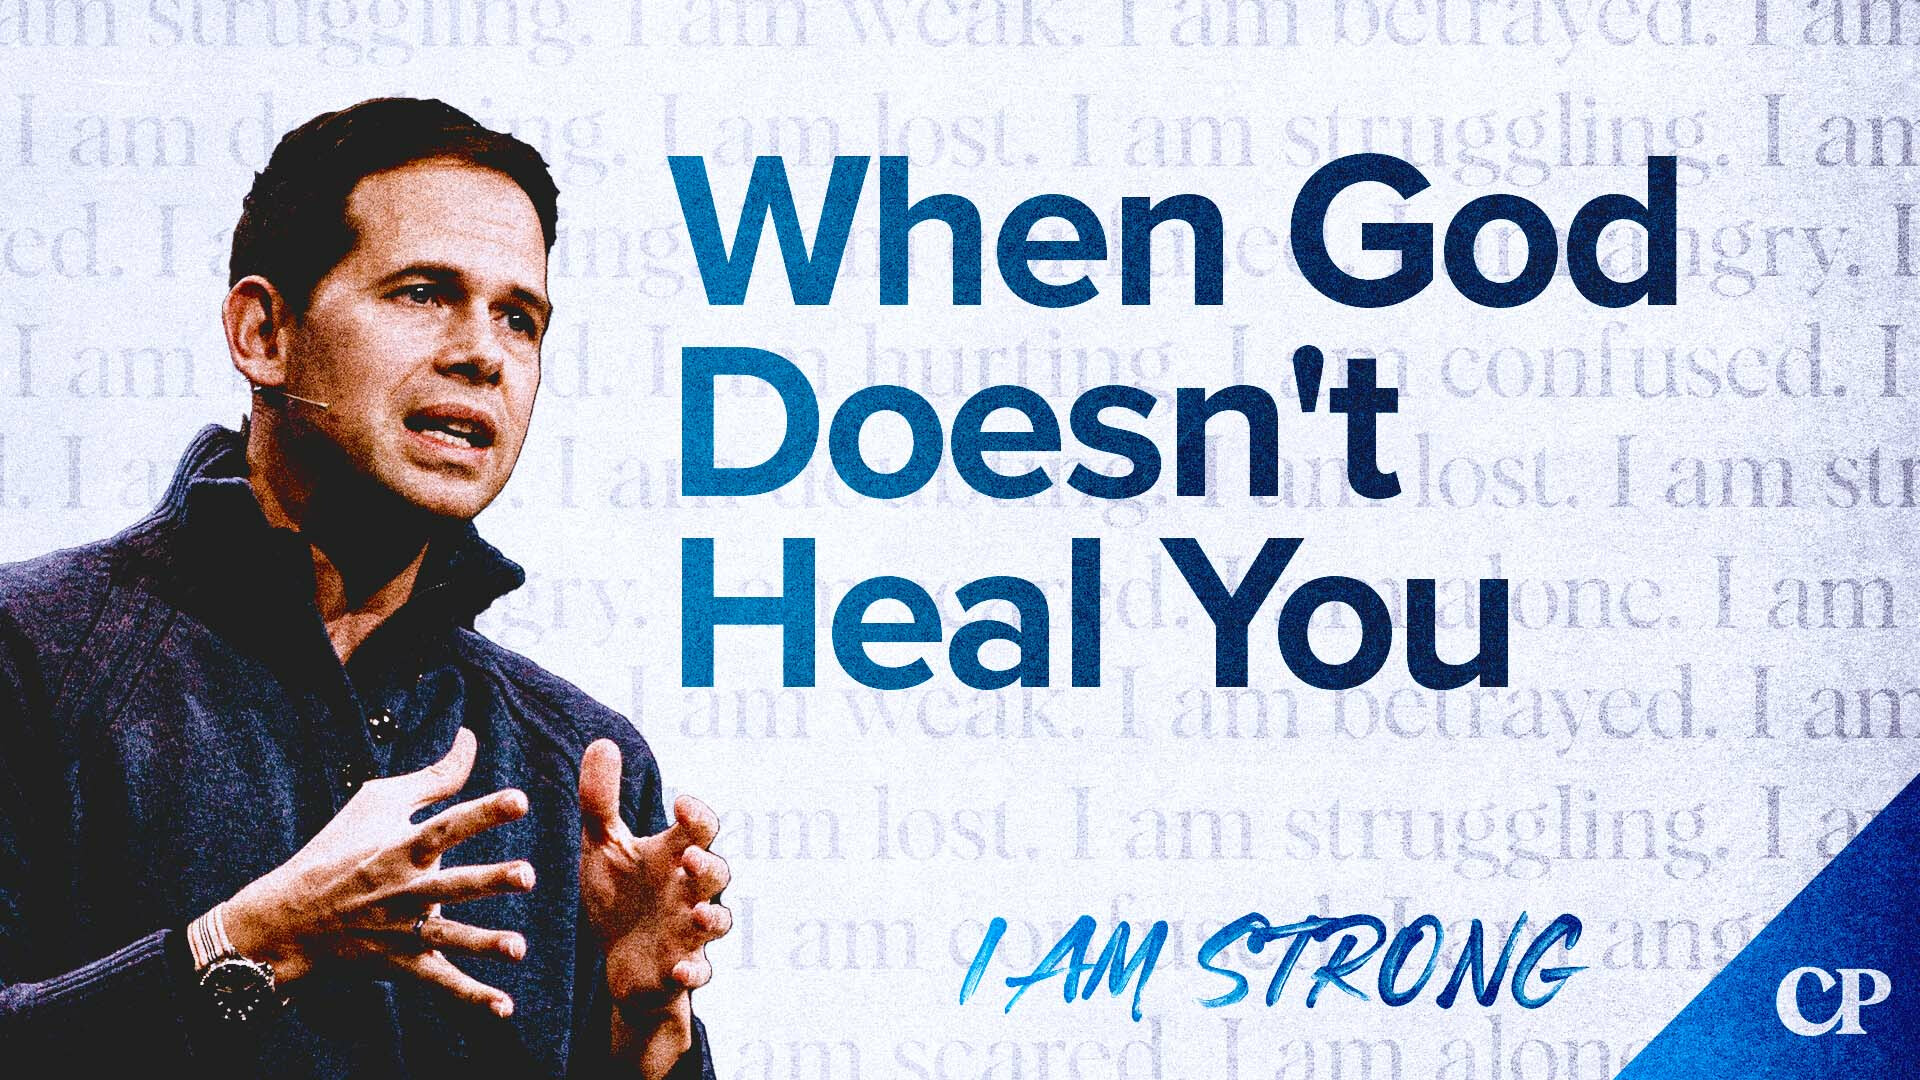 View Message: When God Doesn't Heal You